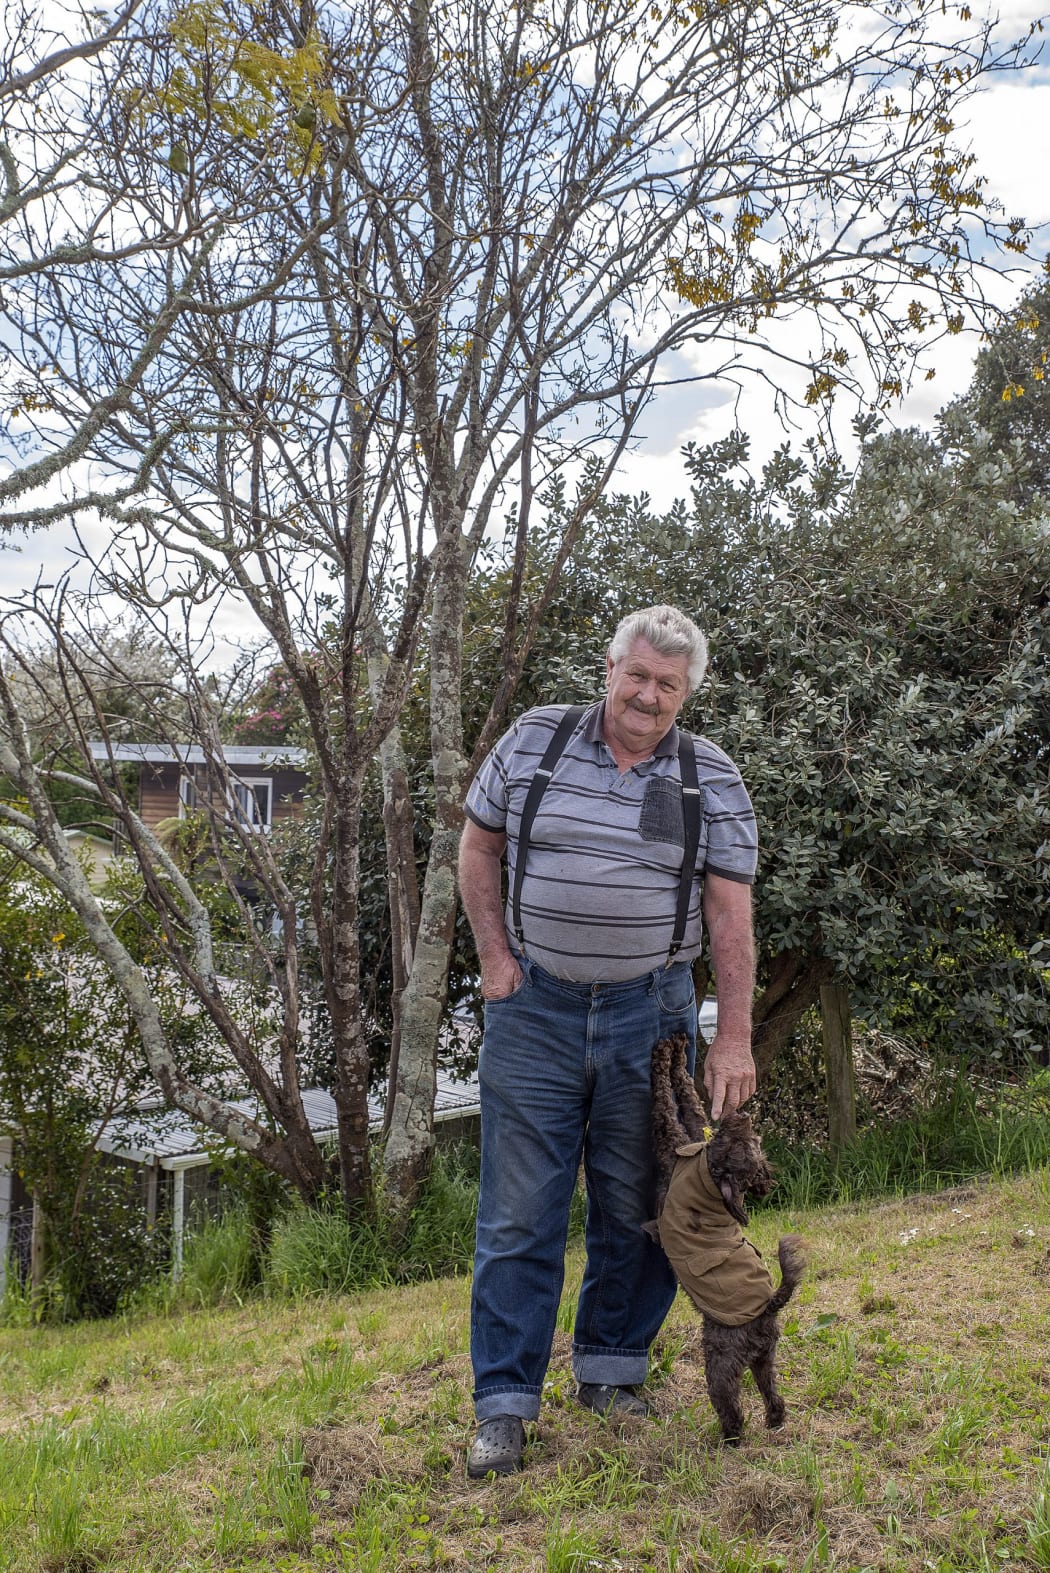 Riverside Drive resident Don Meads and dog Banjo near the kōwhai tree planted on the stopbank behind his house.